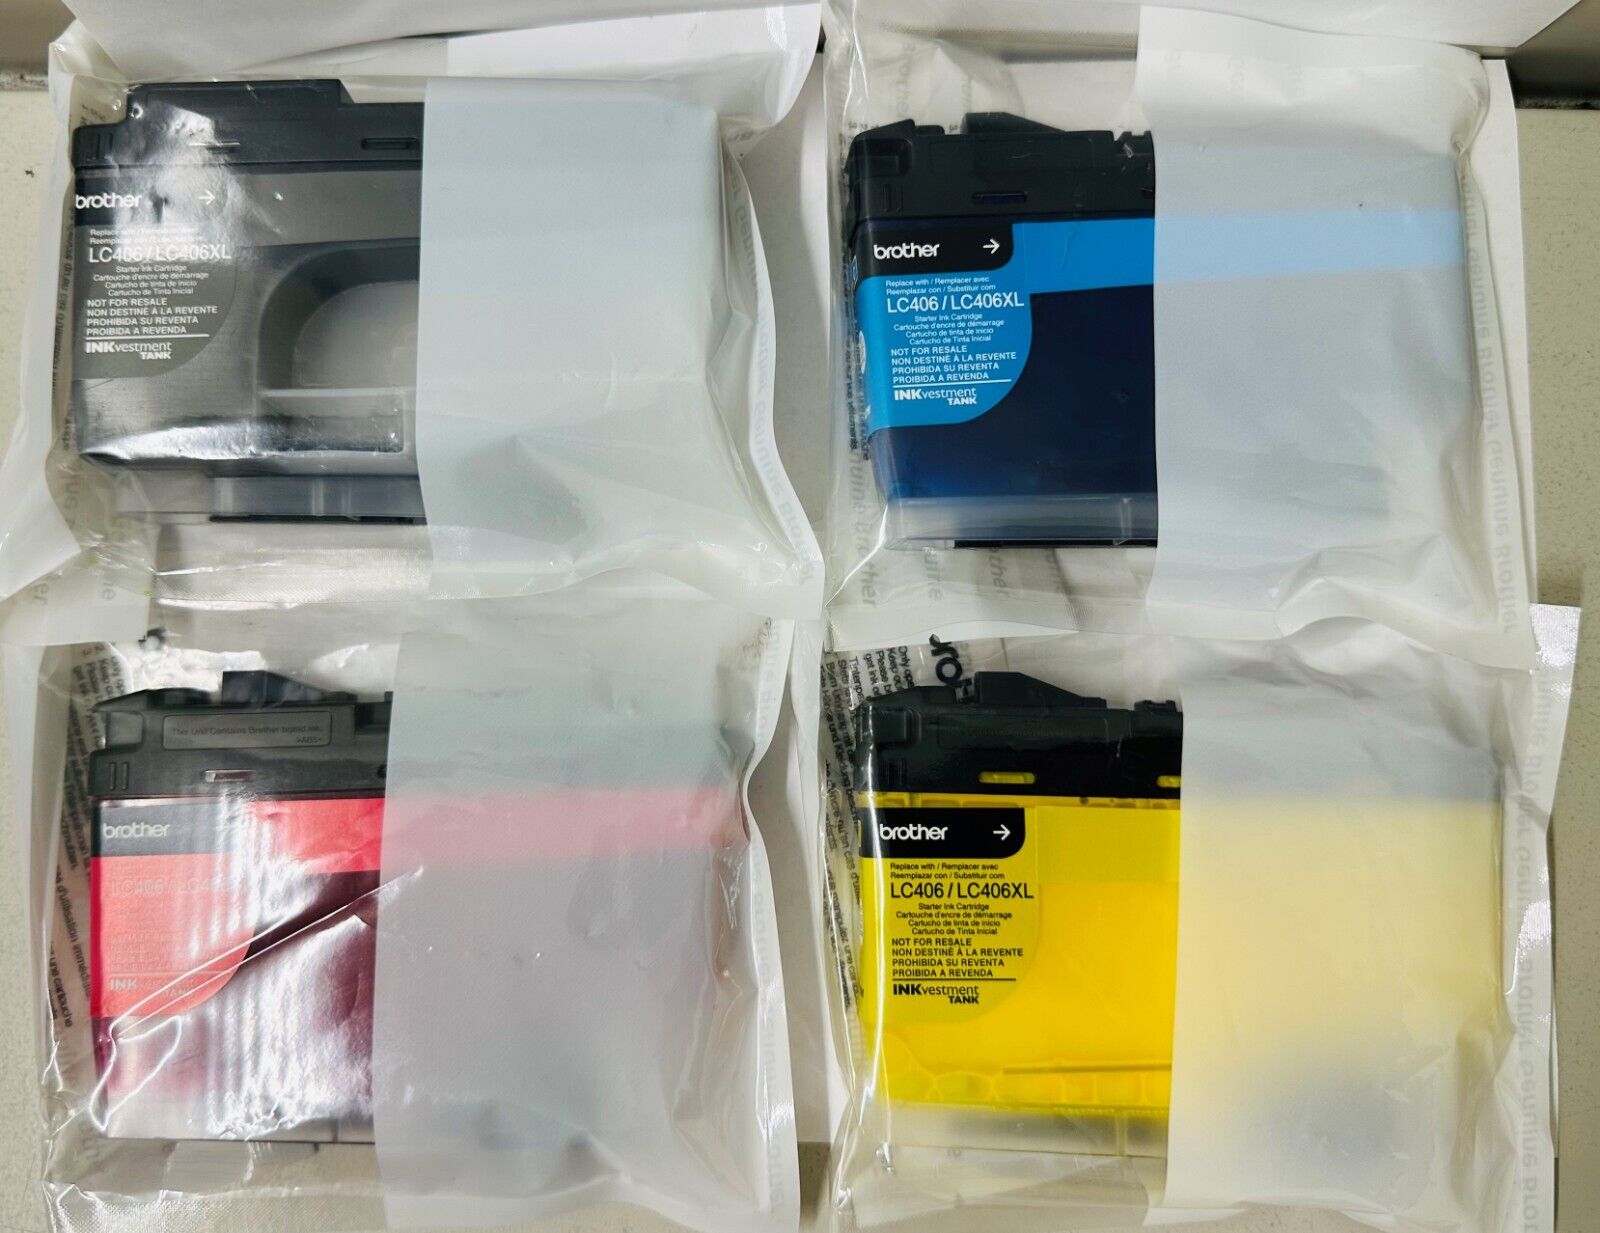 New Genuine Brother LC406 LC406XL 4PK Starter Ink Cartridges Bag